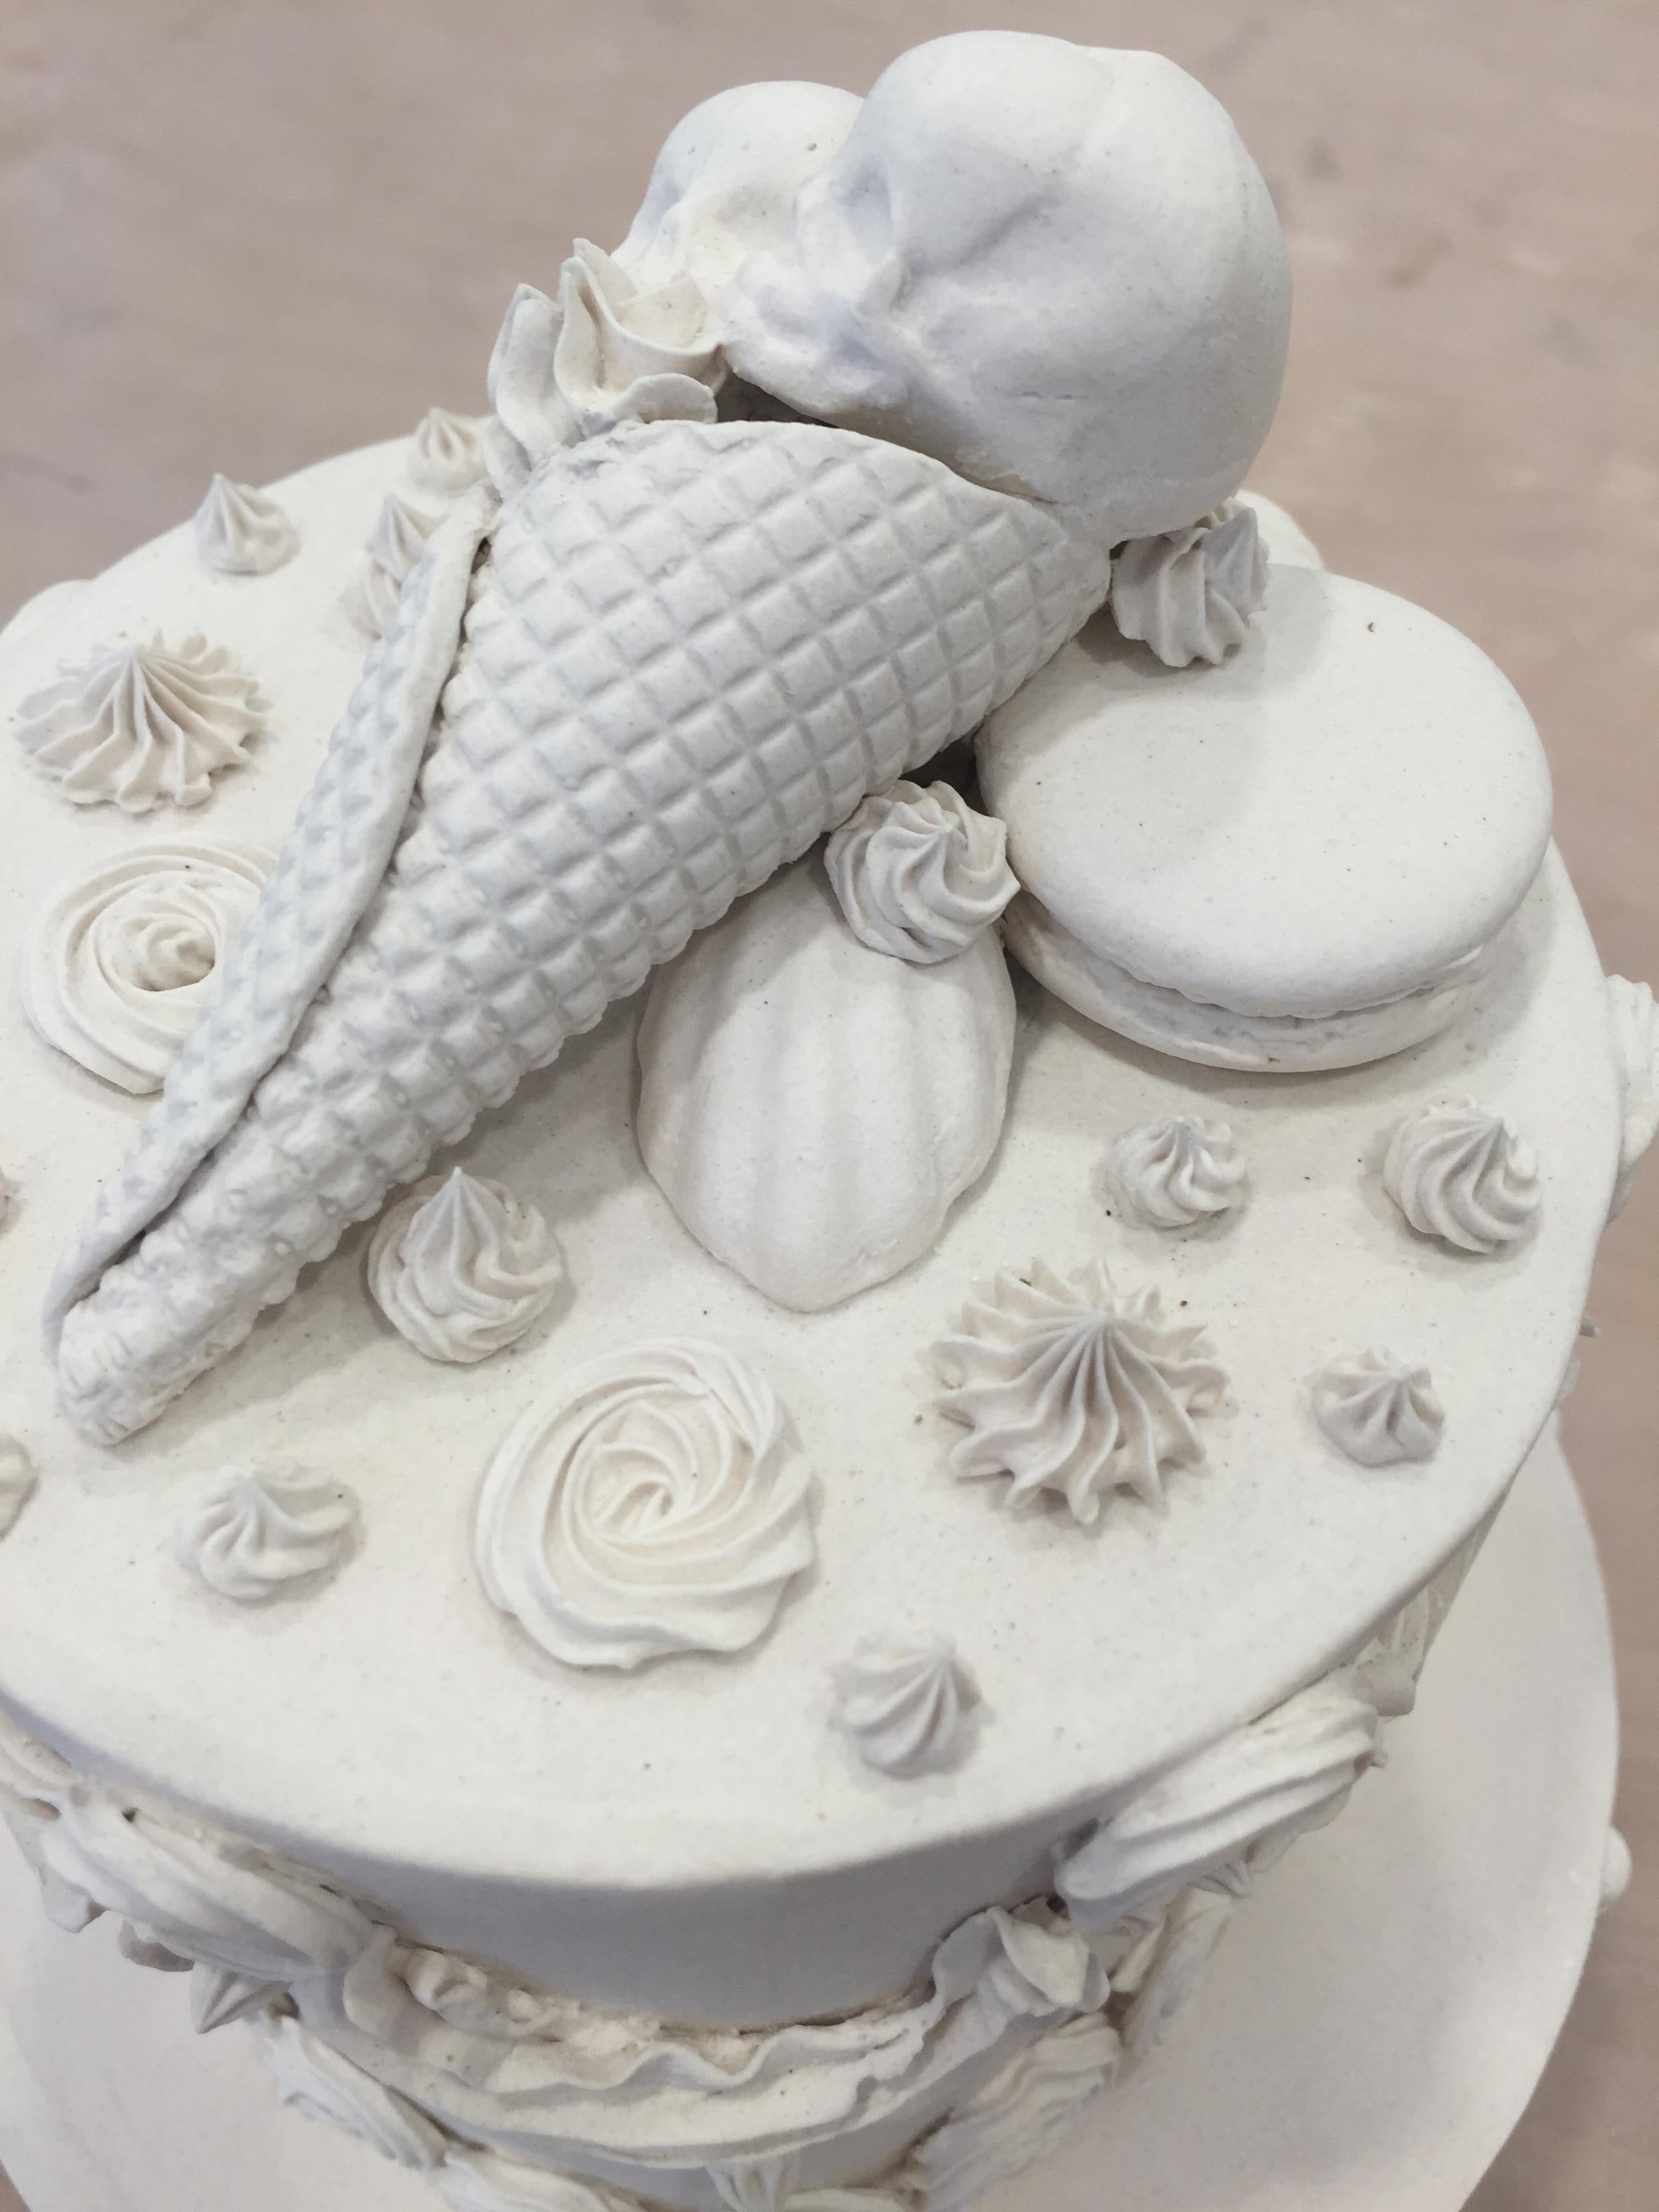 Small cake with a stand - Sculpture by Jacqueline Tse